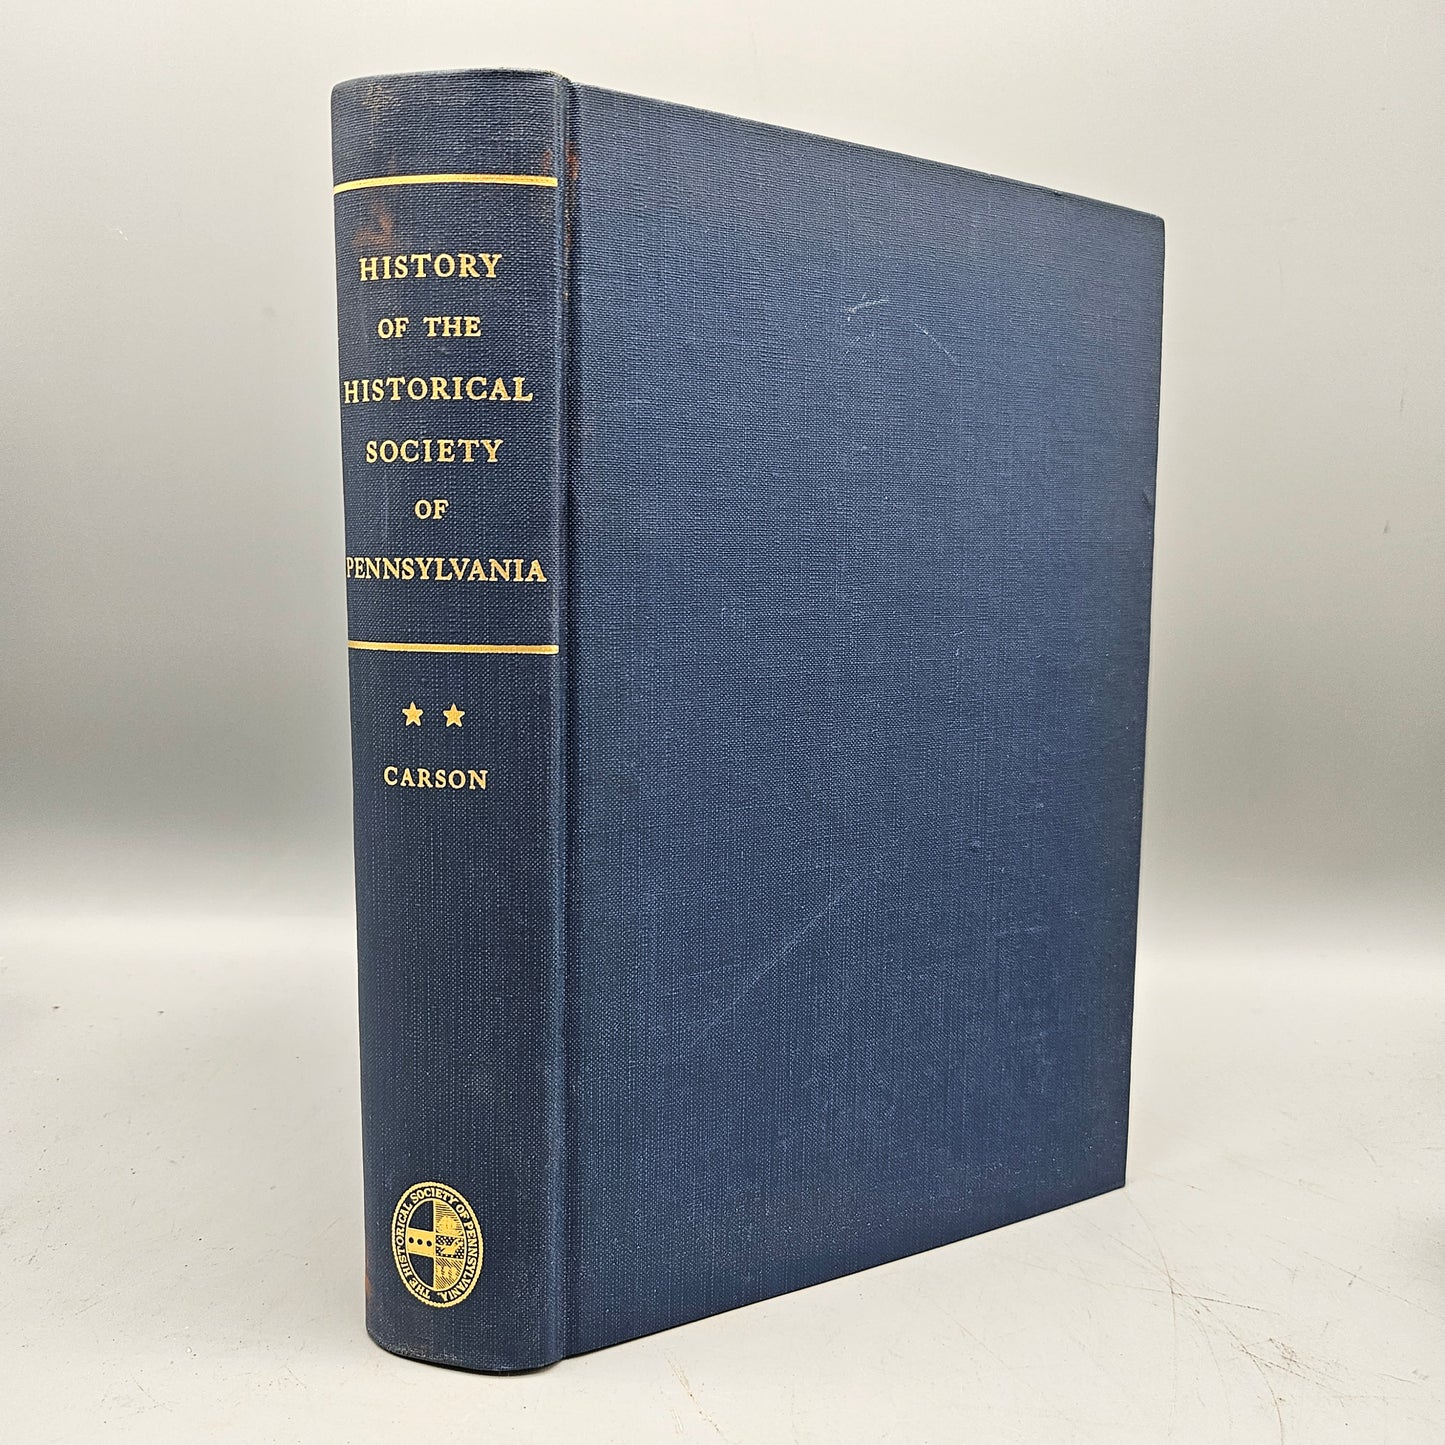 Book: A History of The Historical Society of Pennsylvania Volume Two by Hampton Carson